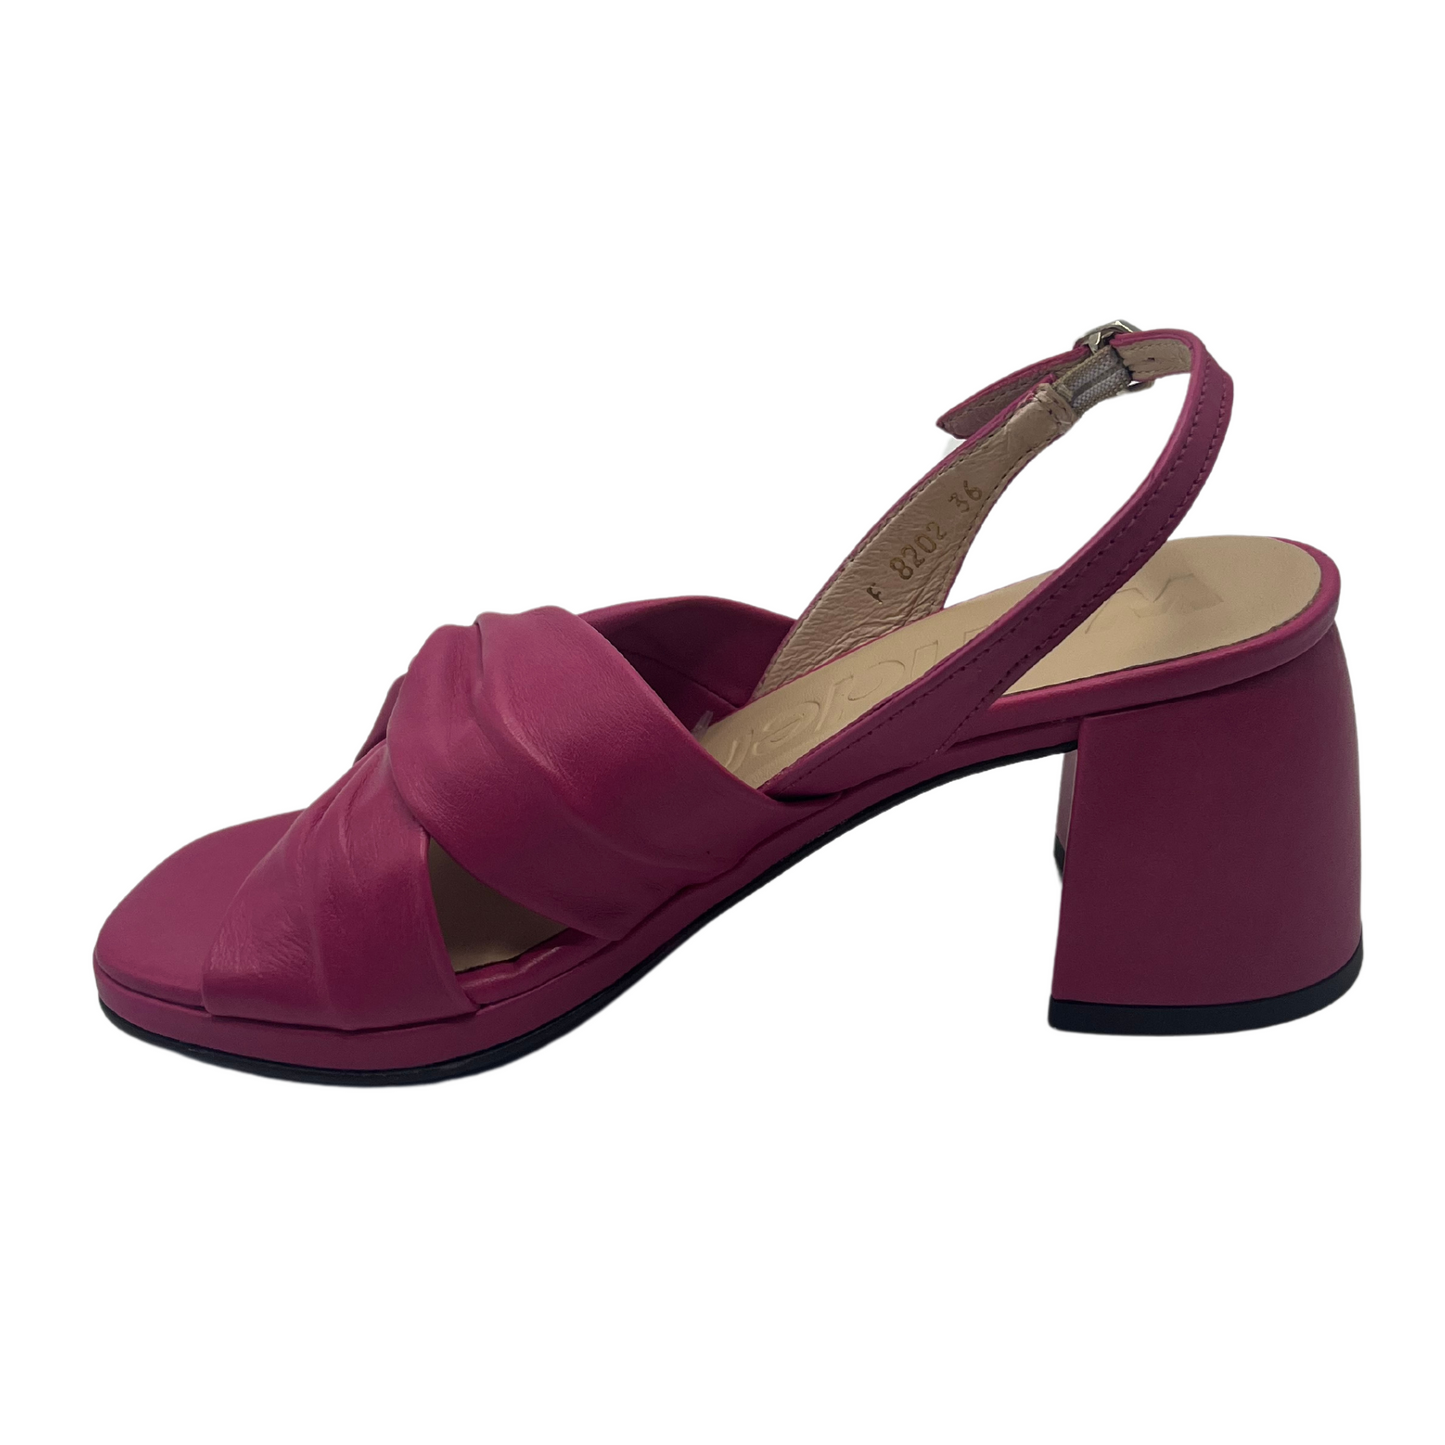 Left facing view of orchid leather sandal with chunky block heel and buckle strap